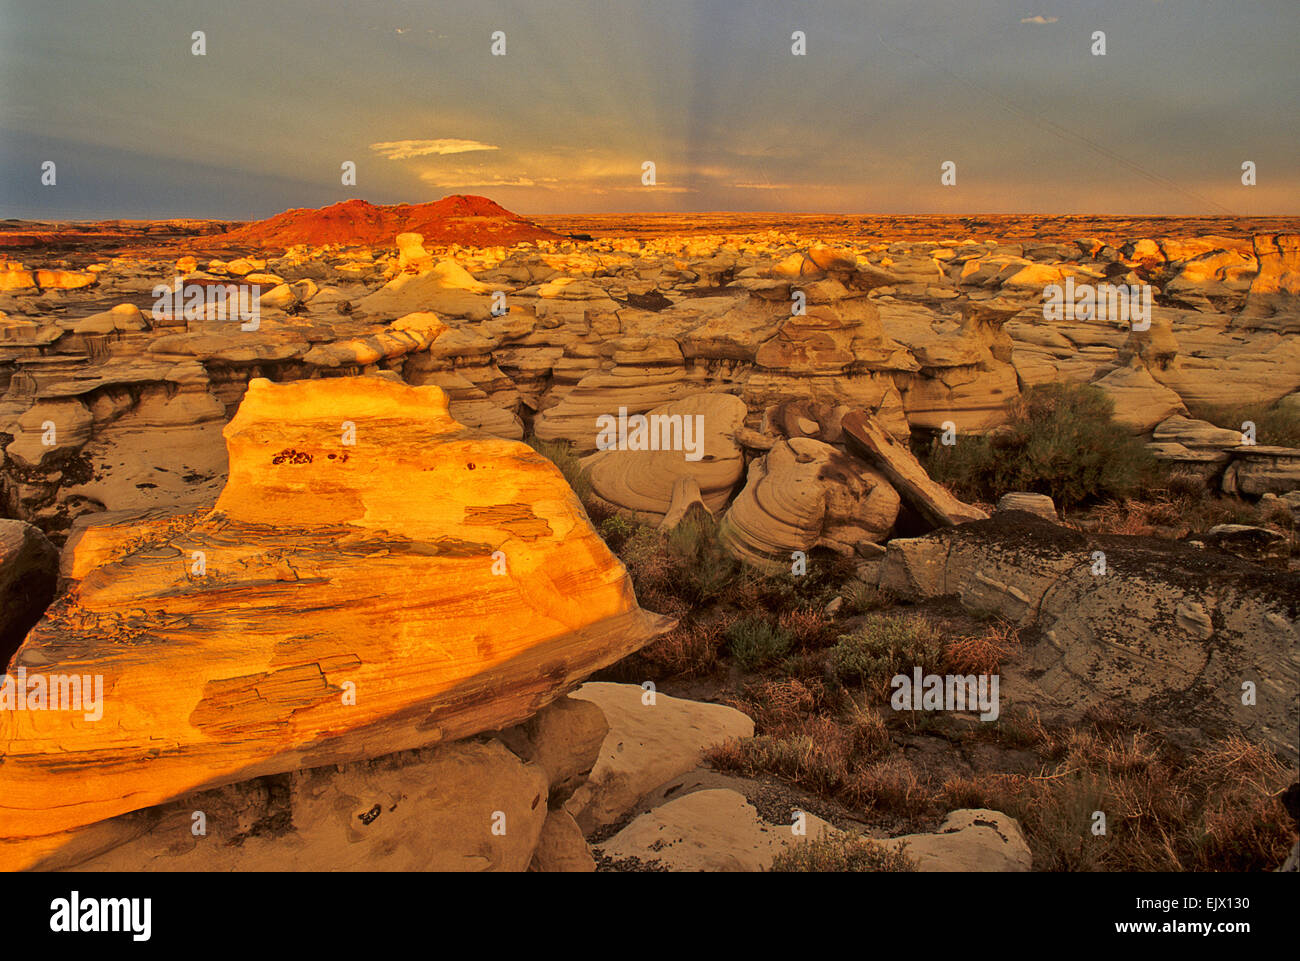 A sunset seems especially eerie and majestic at the Bisti Wilderness Recreation Area near Farmington, New Mexico. Stock Photo